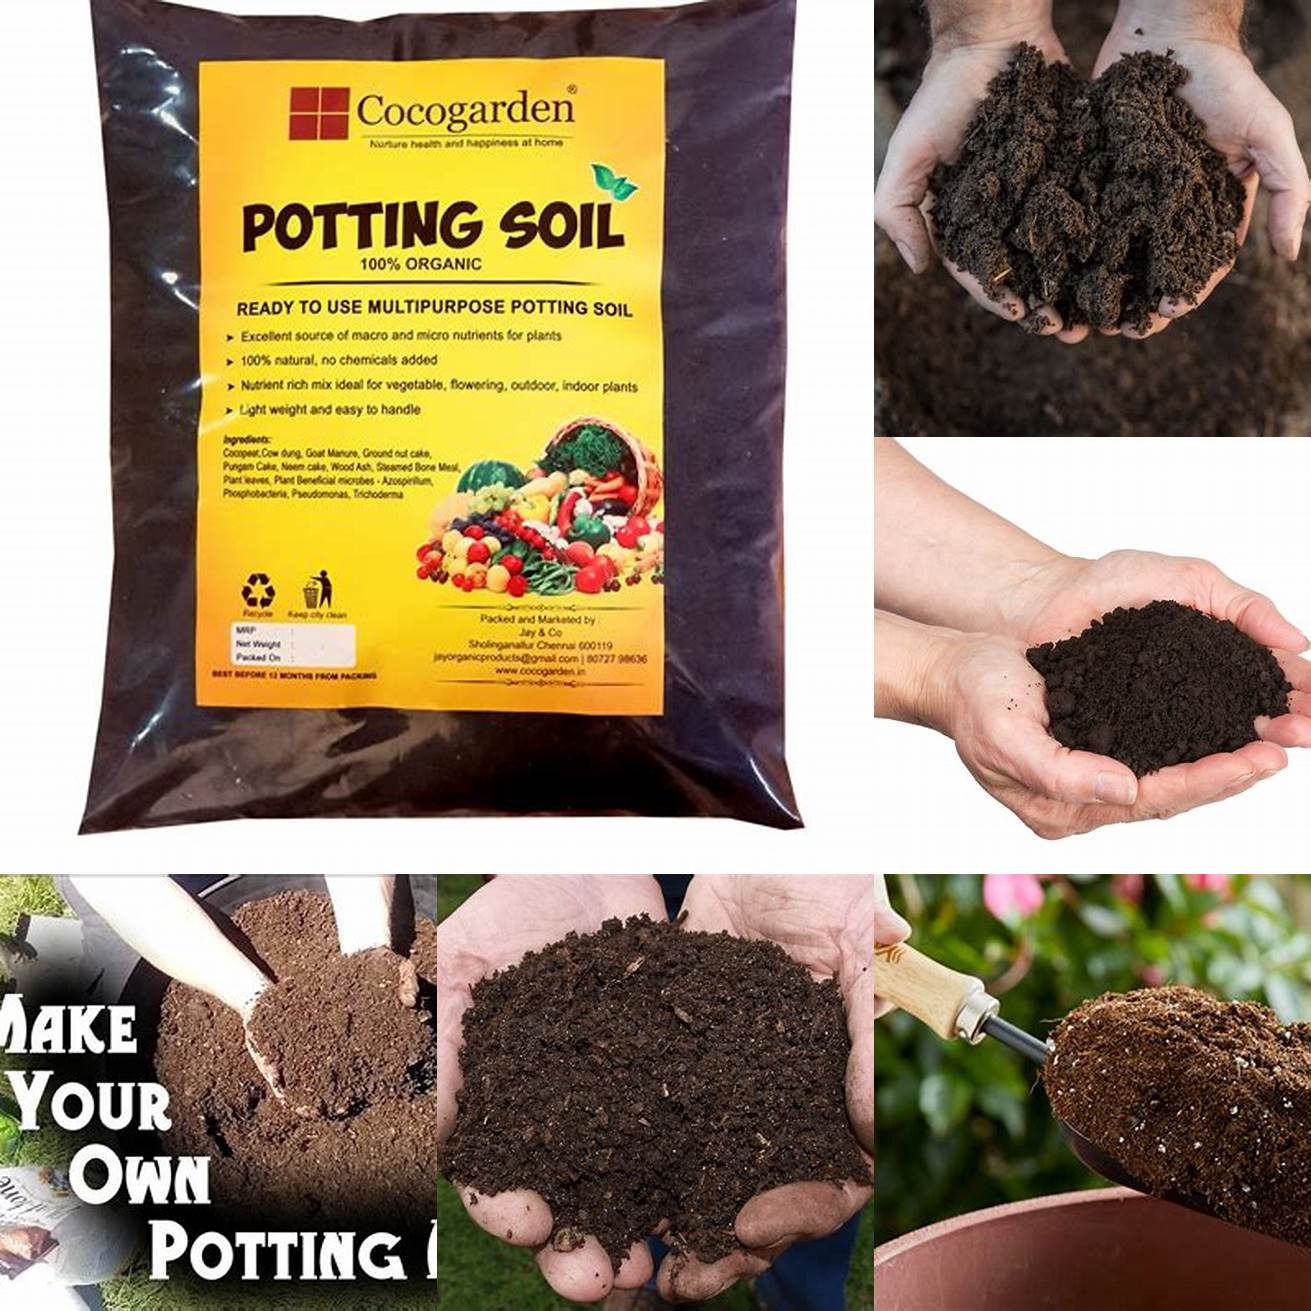 Use High-Quality Soil Choose a soil mix that is high in organic matter